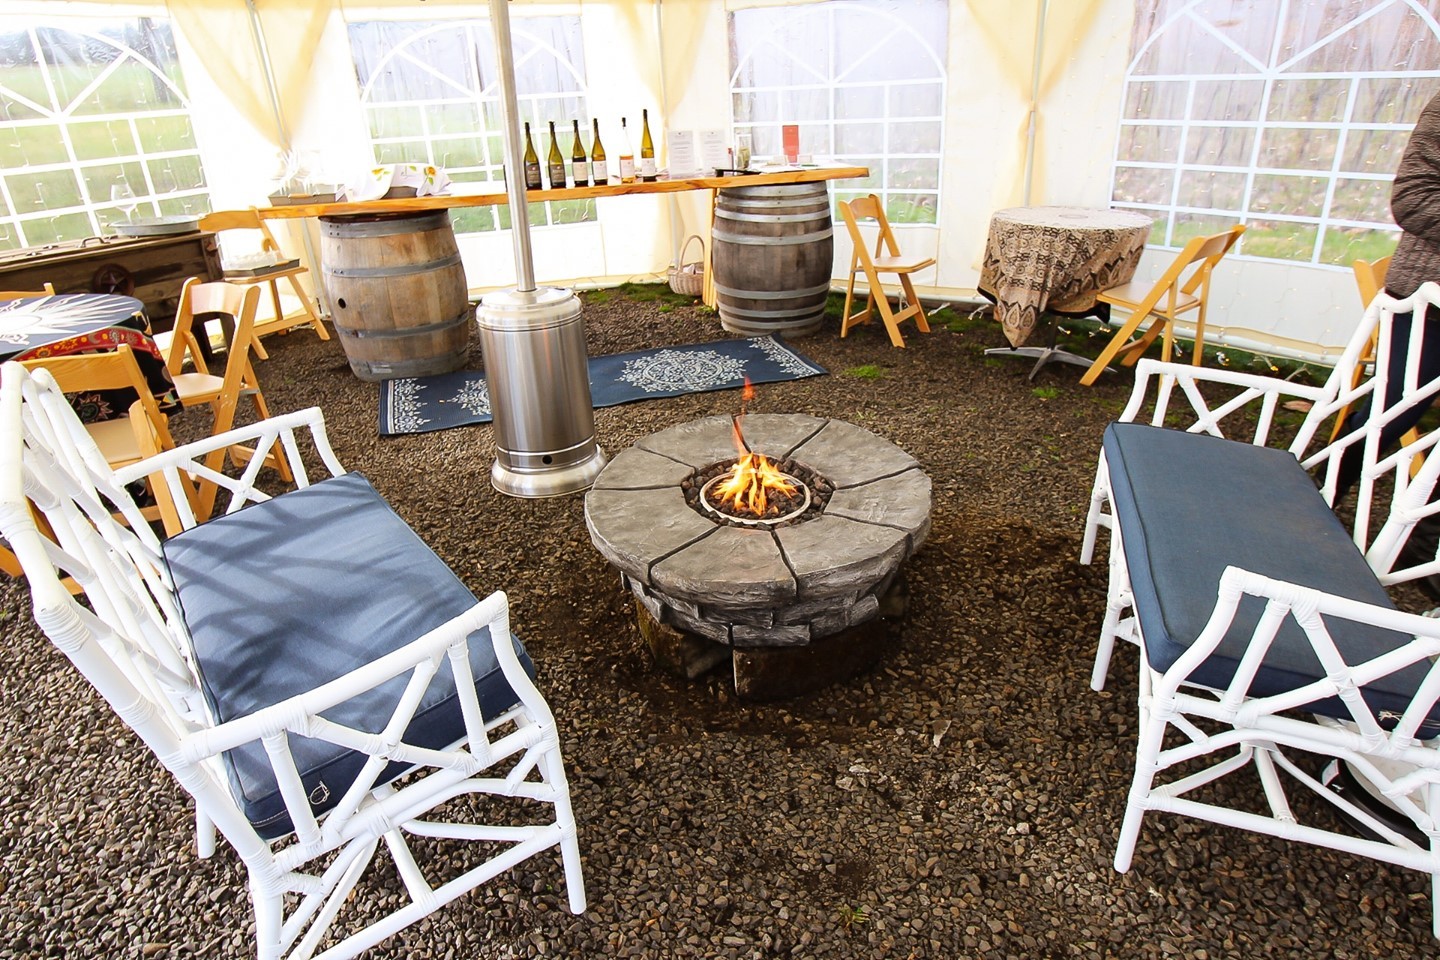 Fire pit and couches in the outdoor tasting tent